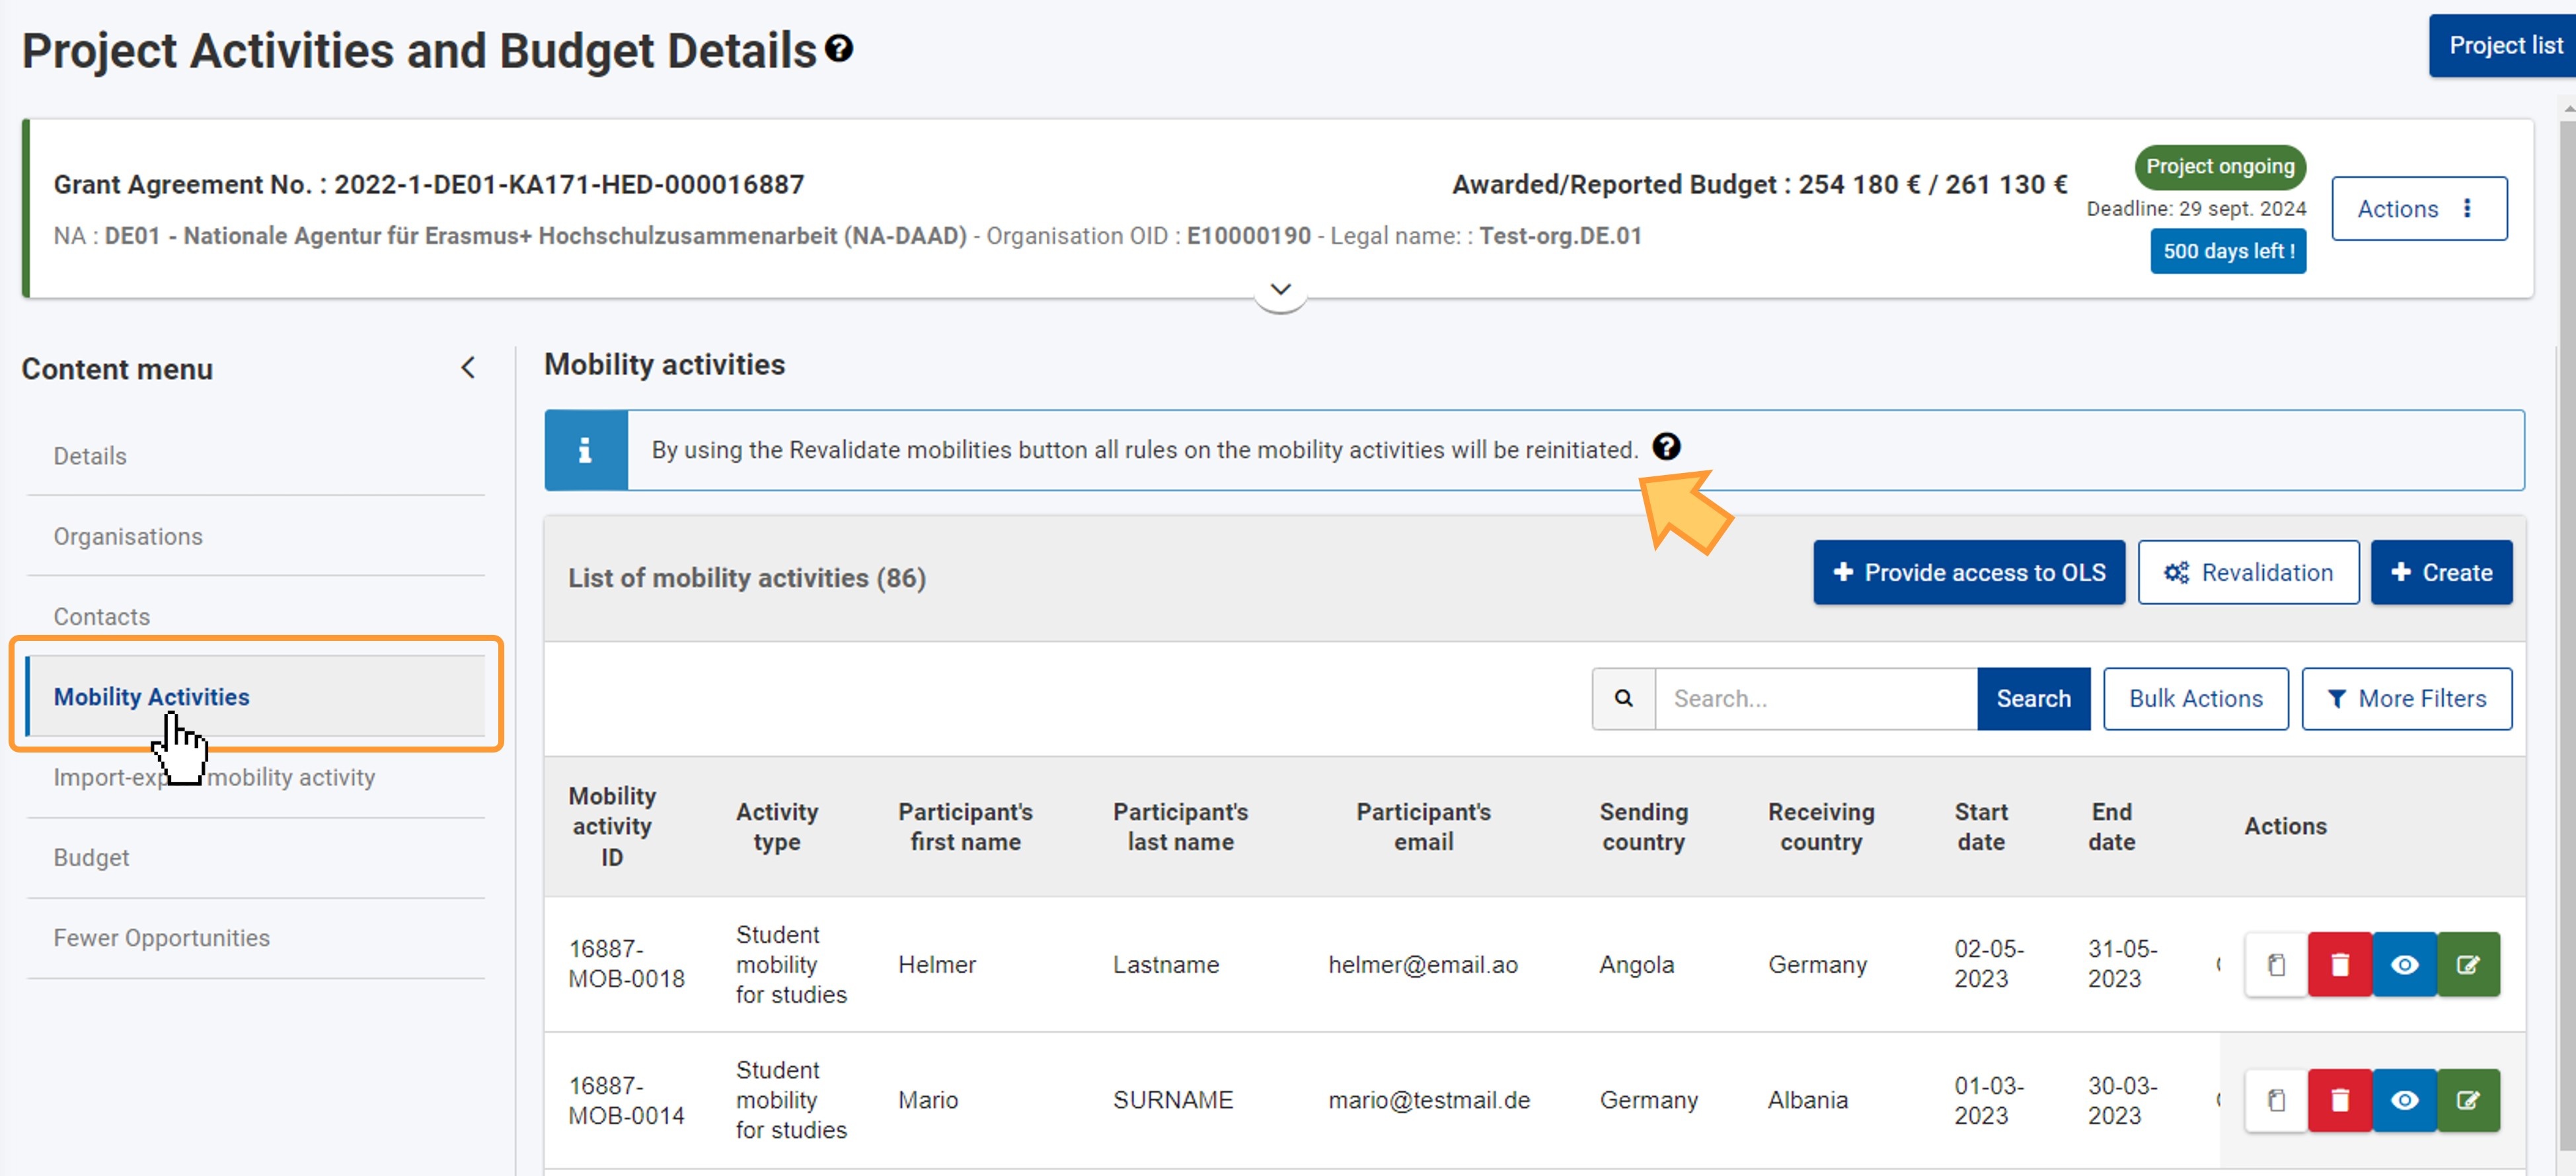 Access the list of mobility activities by selecting Mobility Activities from the Content menu